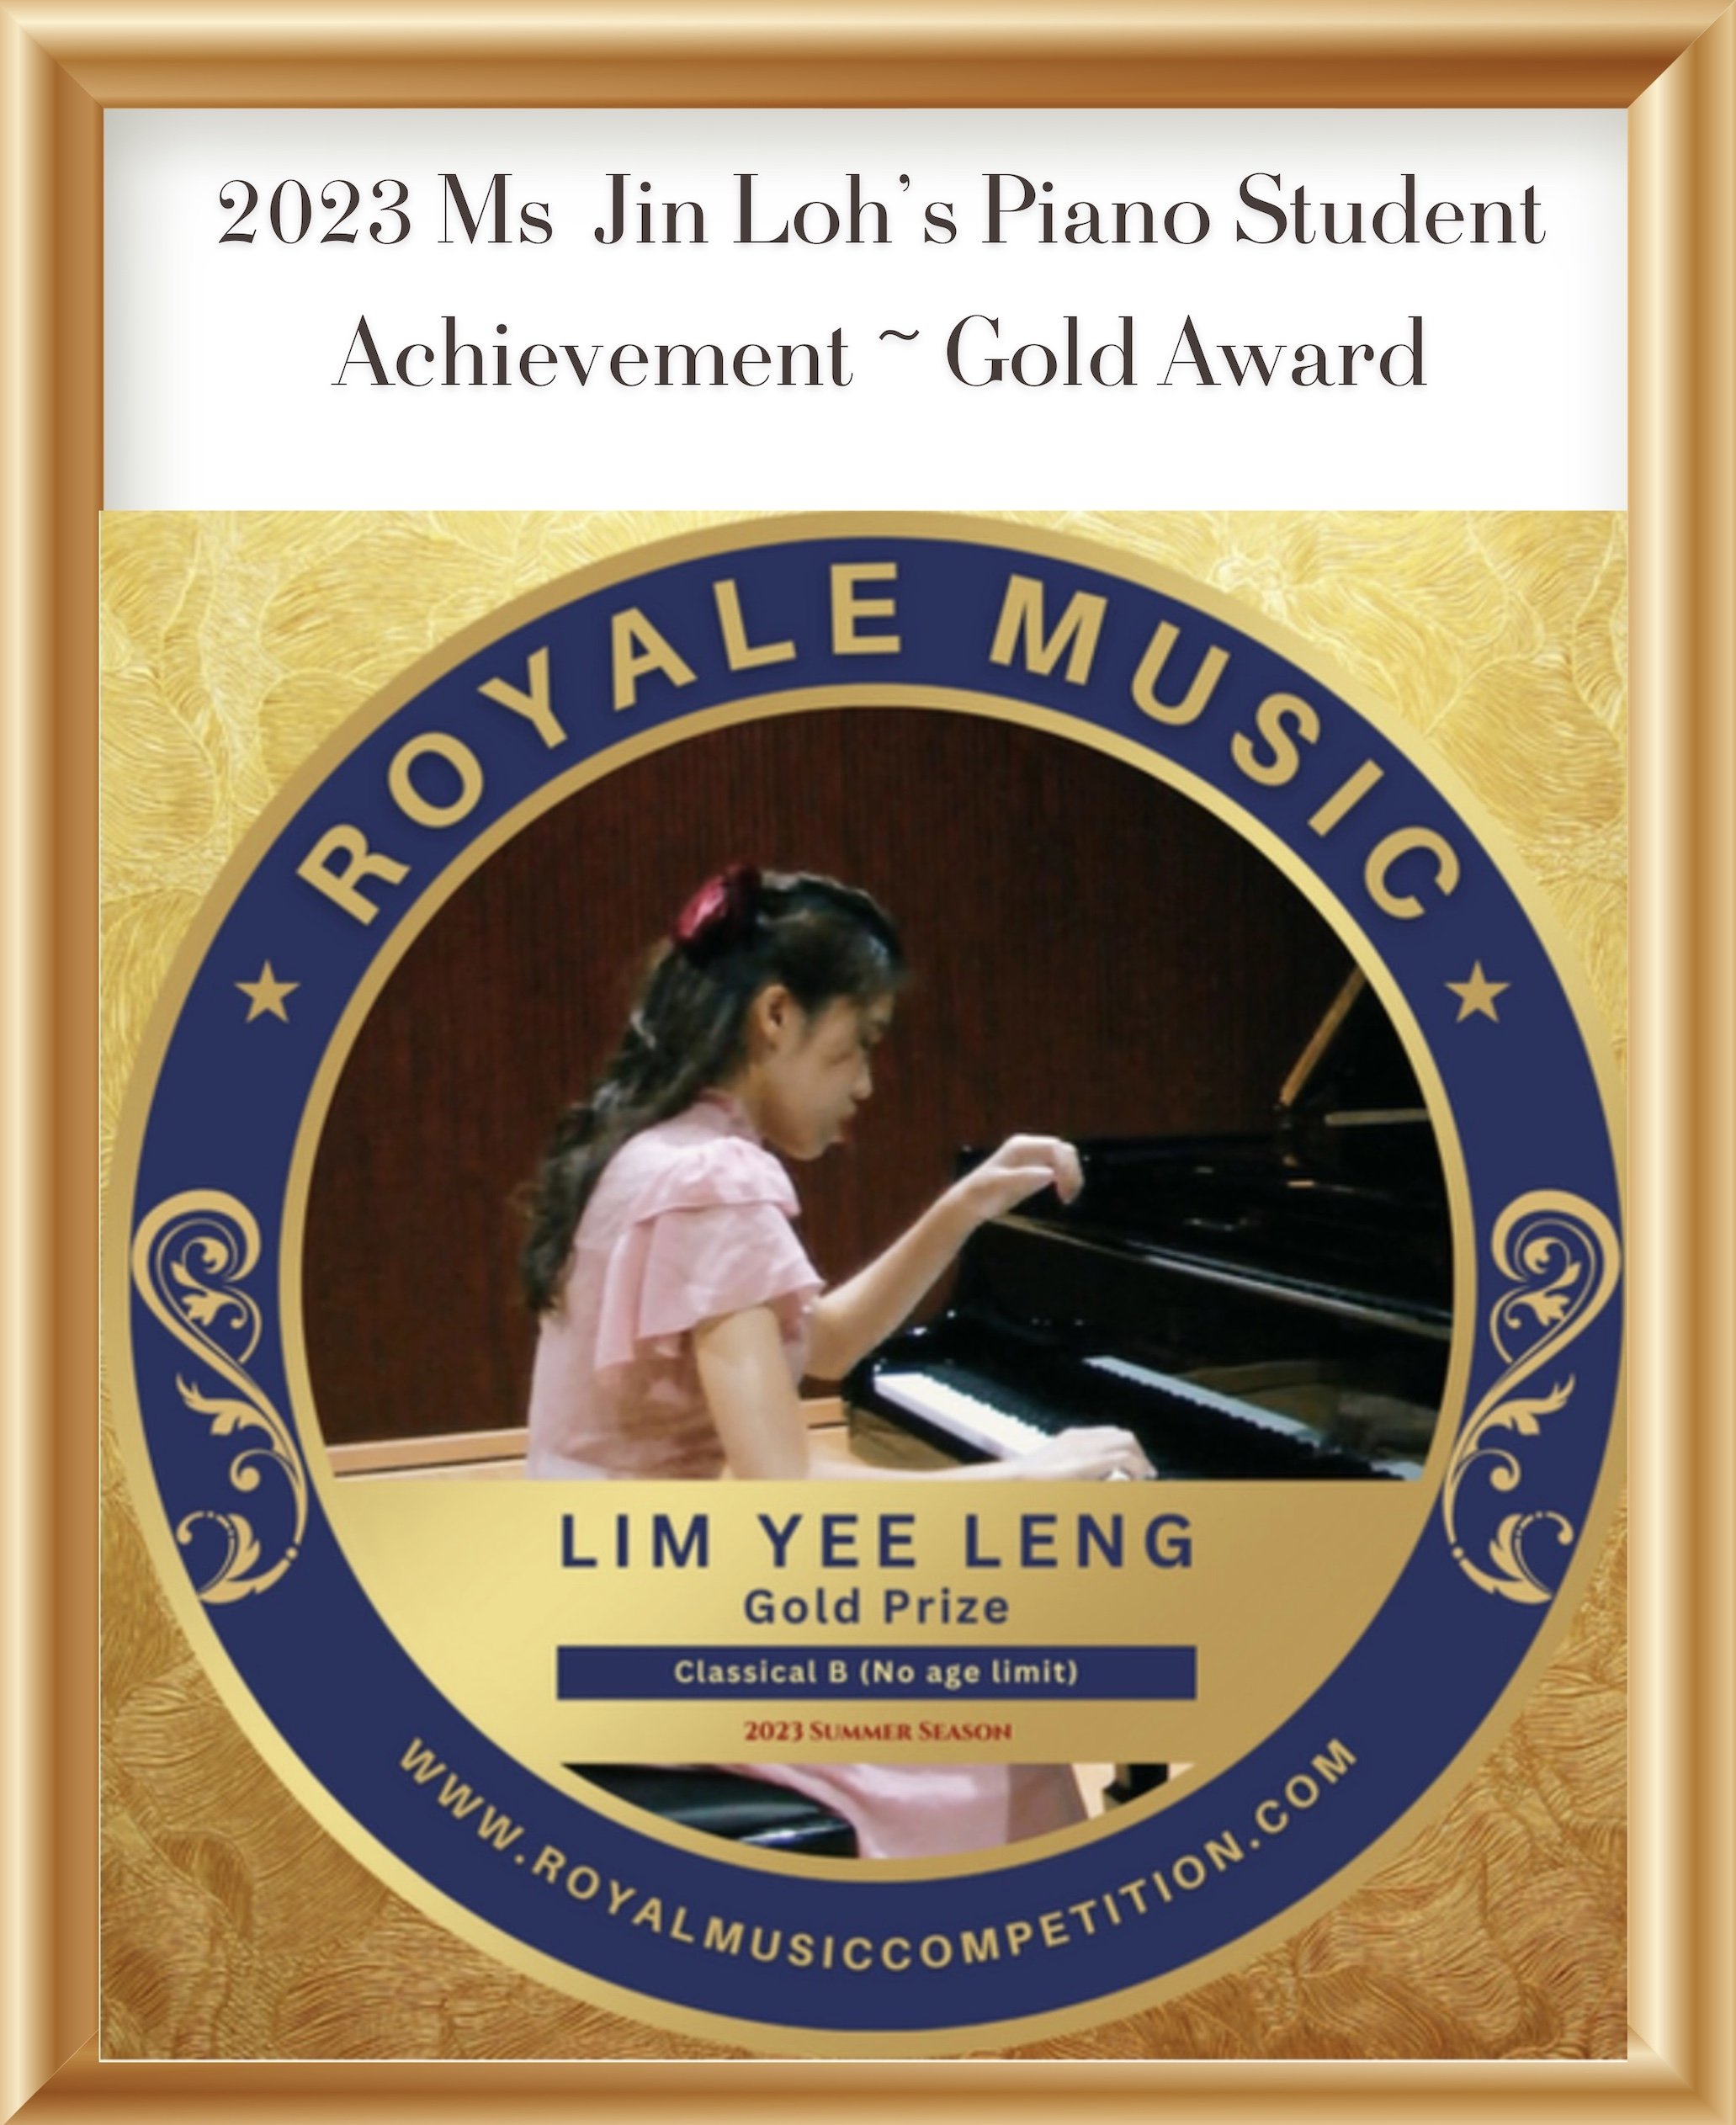 2023 Royale Music Competition with frame (Yee Leng)